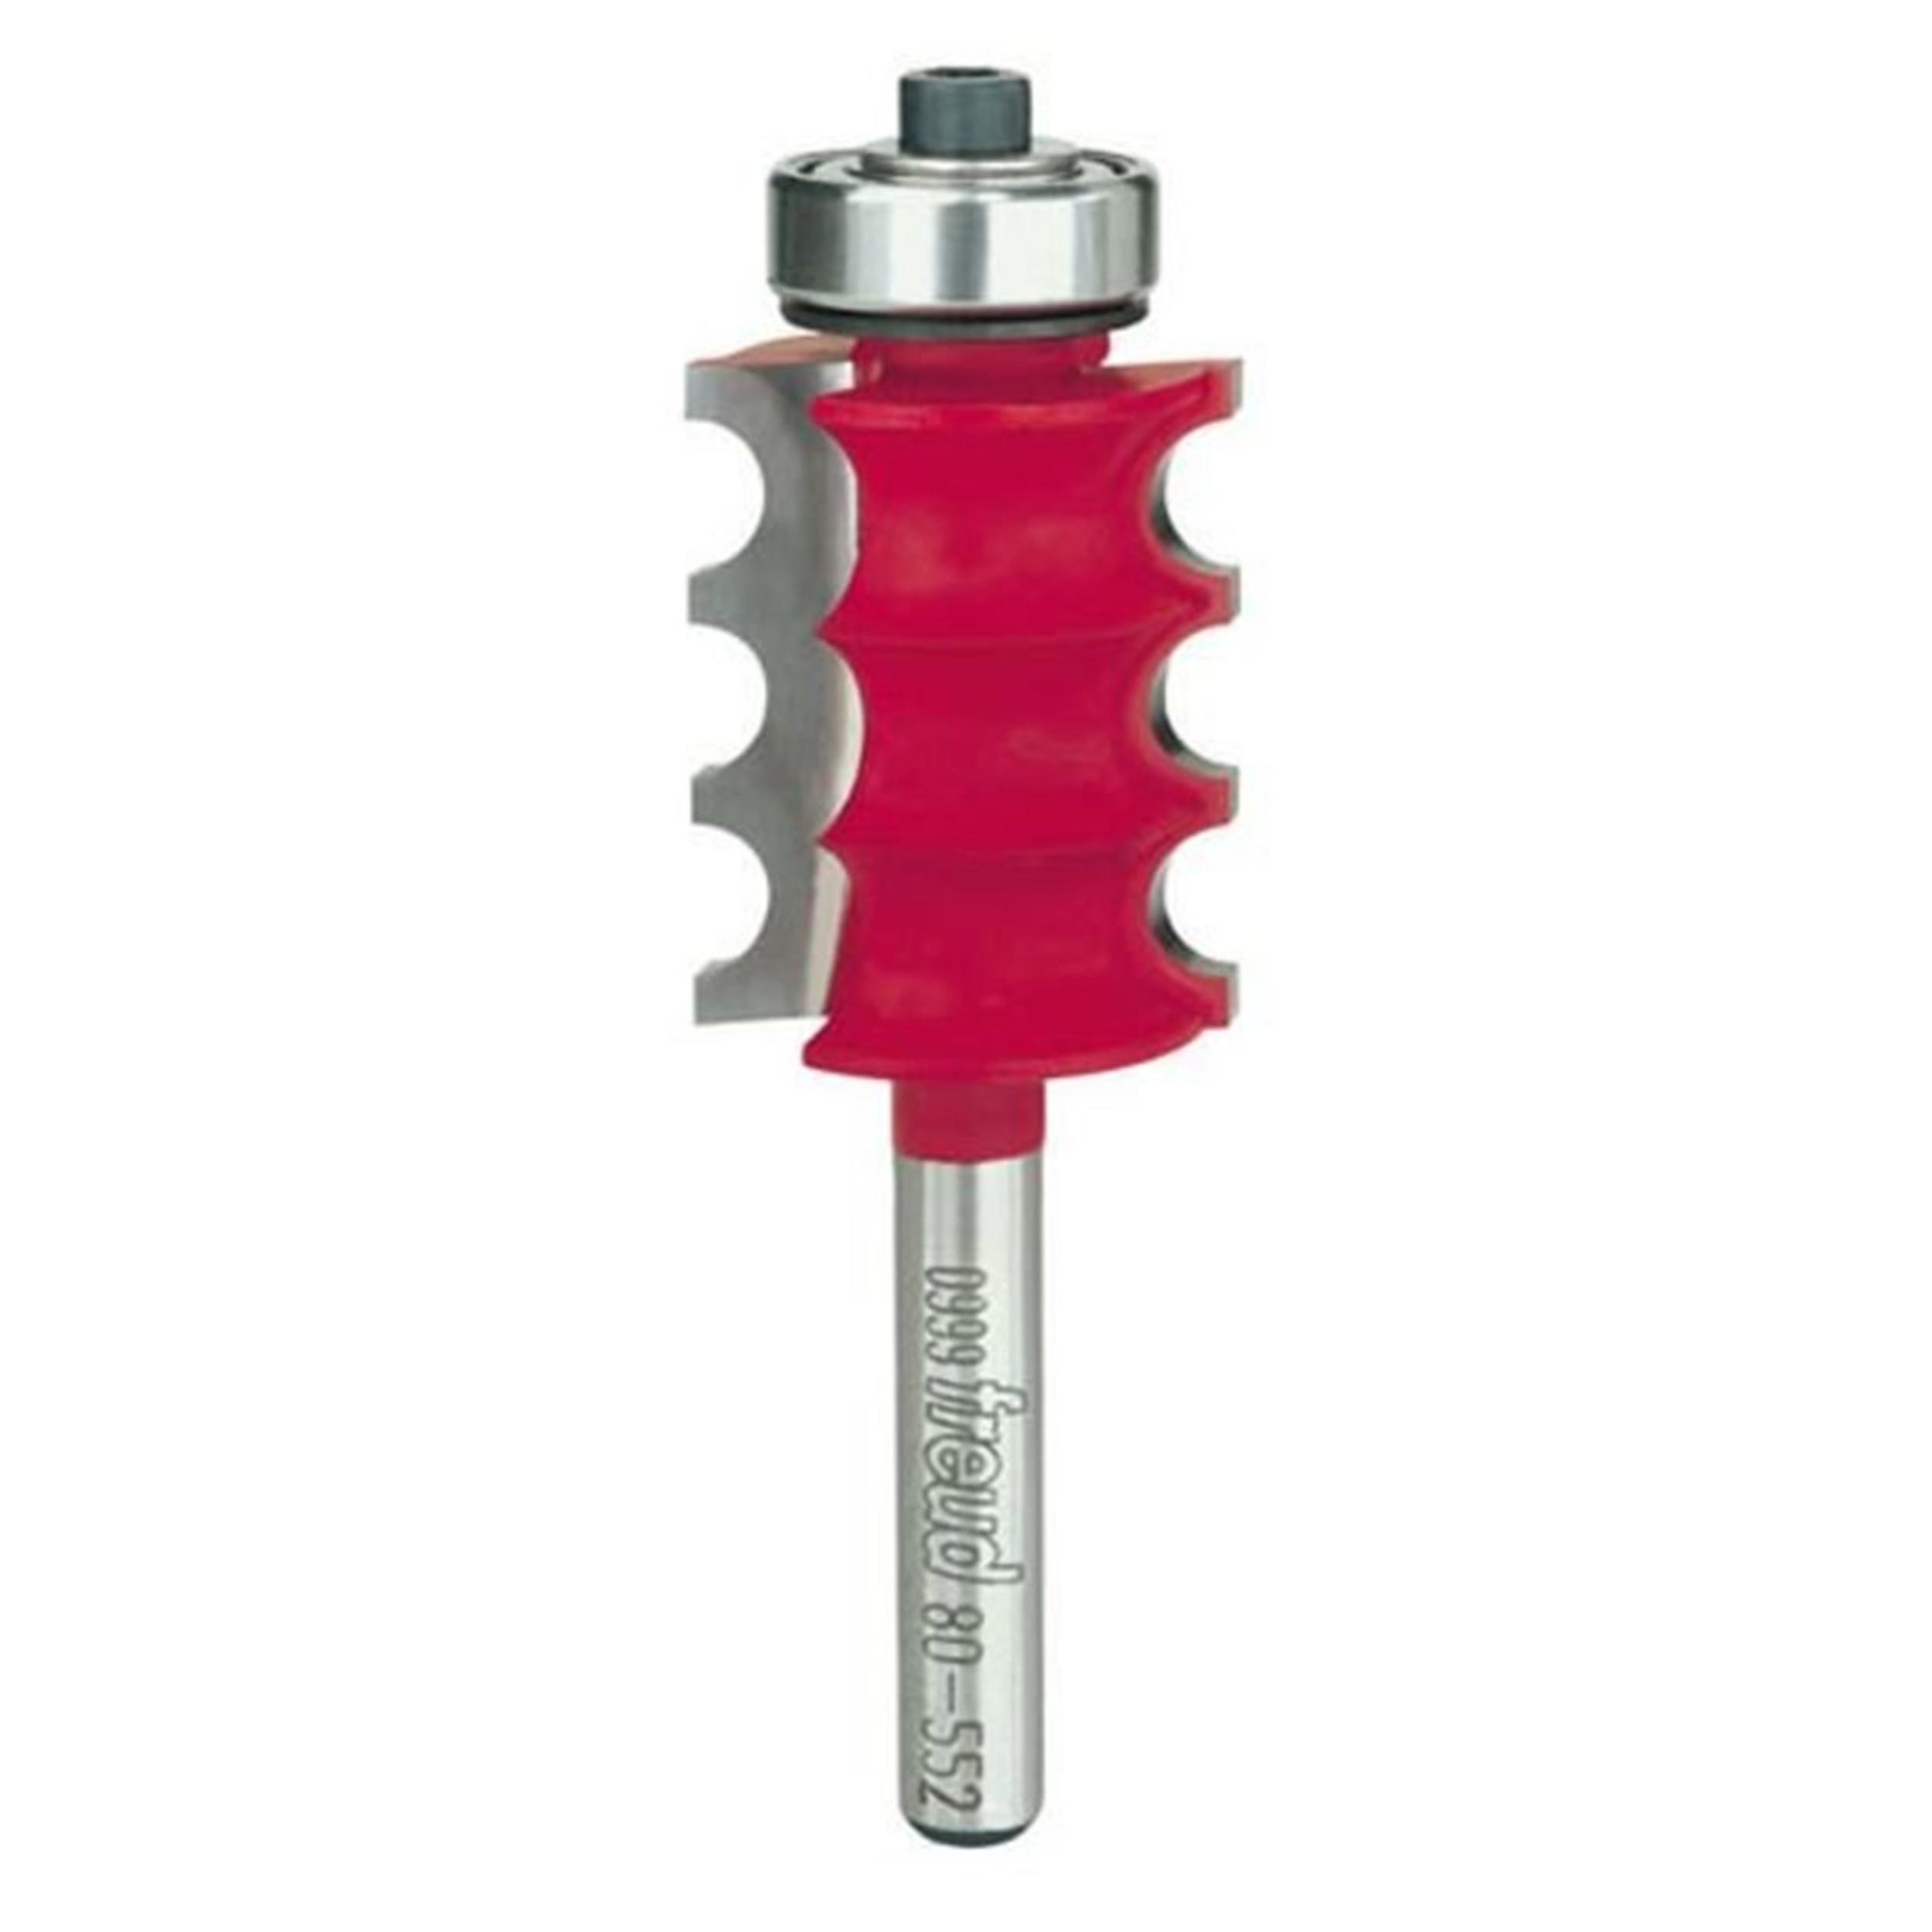 80-552 Triple Beading And Fluting Router Bit 1/4" Shank 1/8" R 1-5/64" Cl